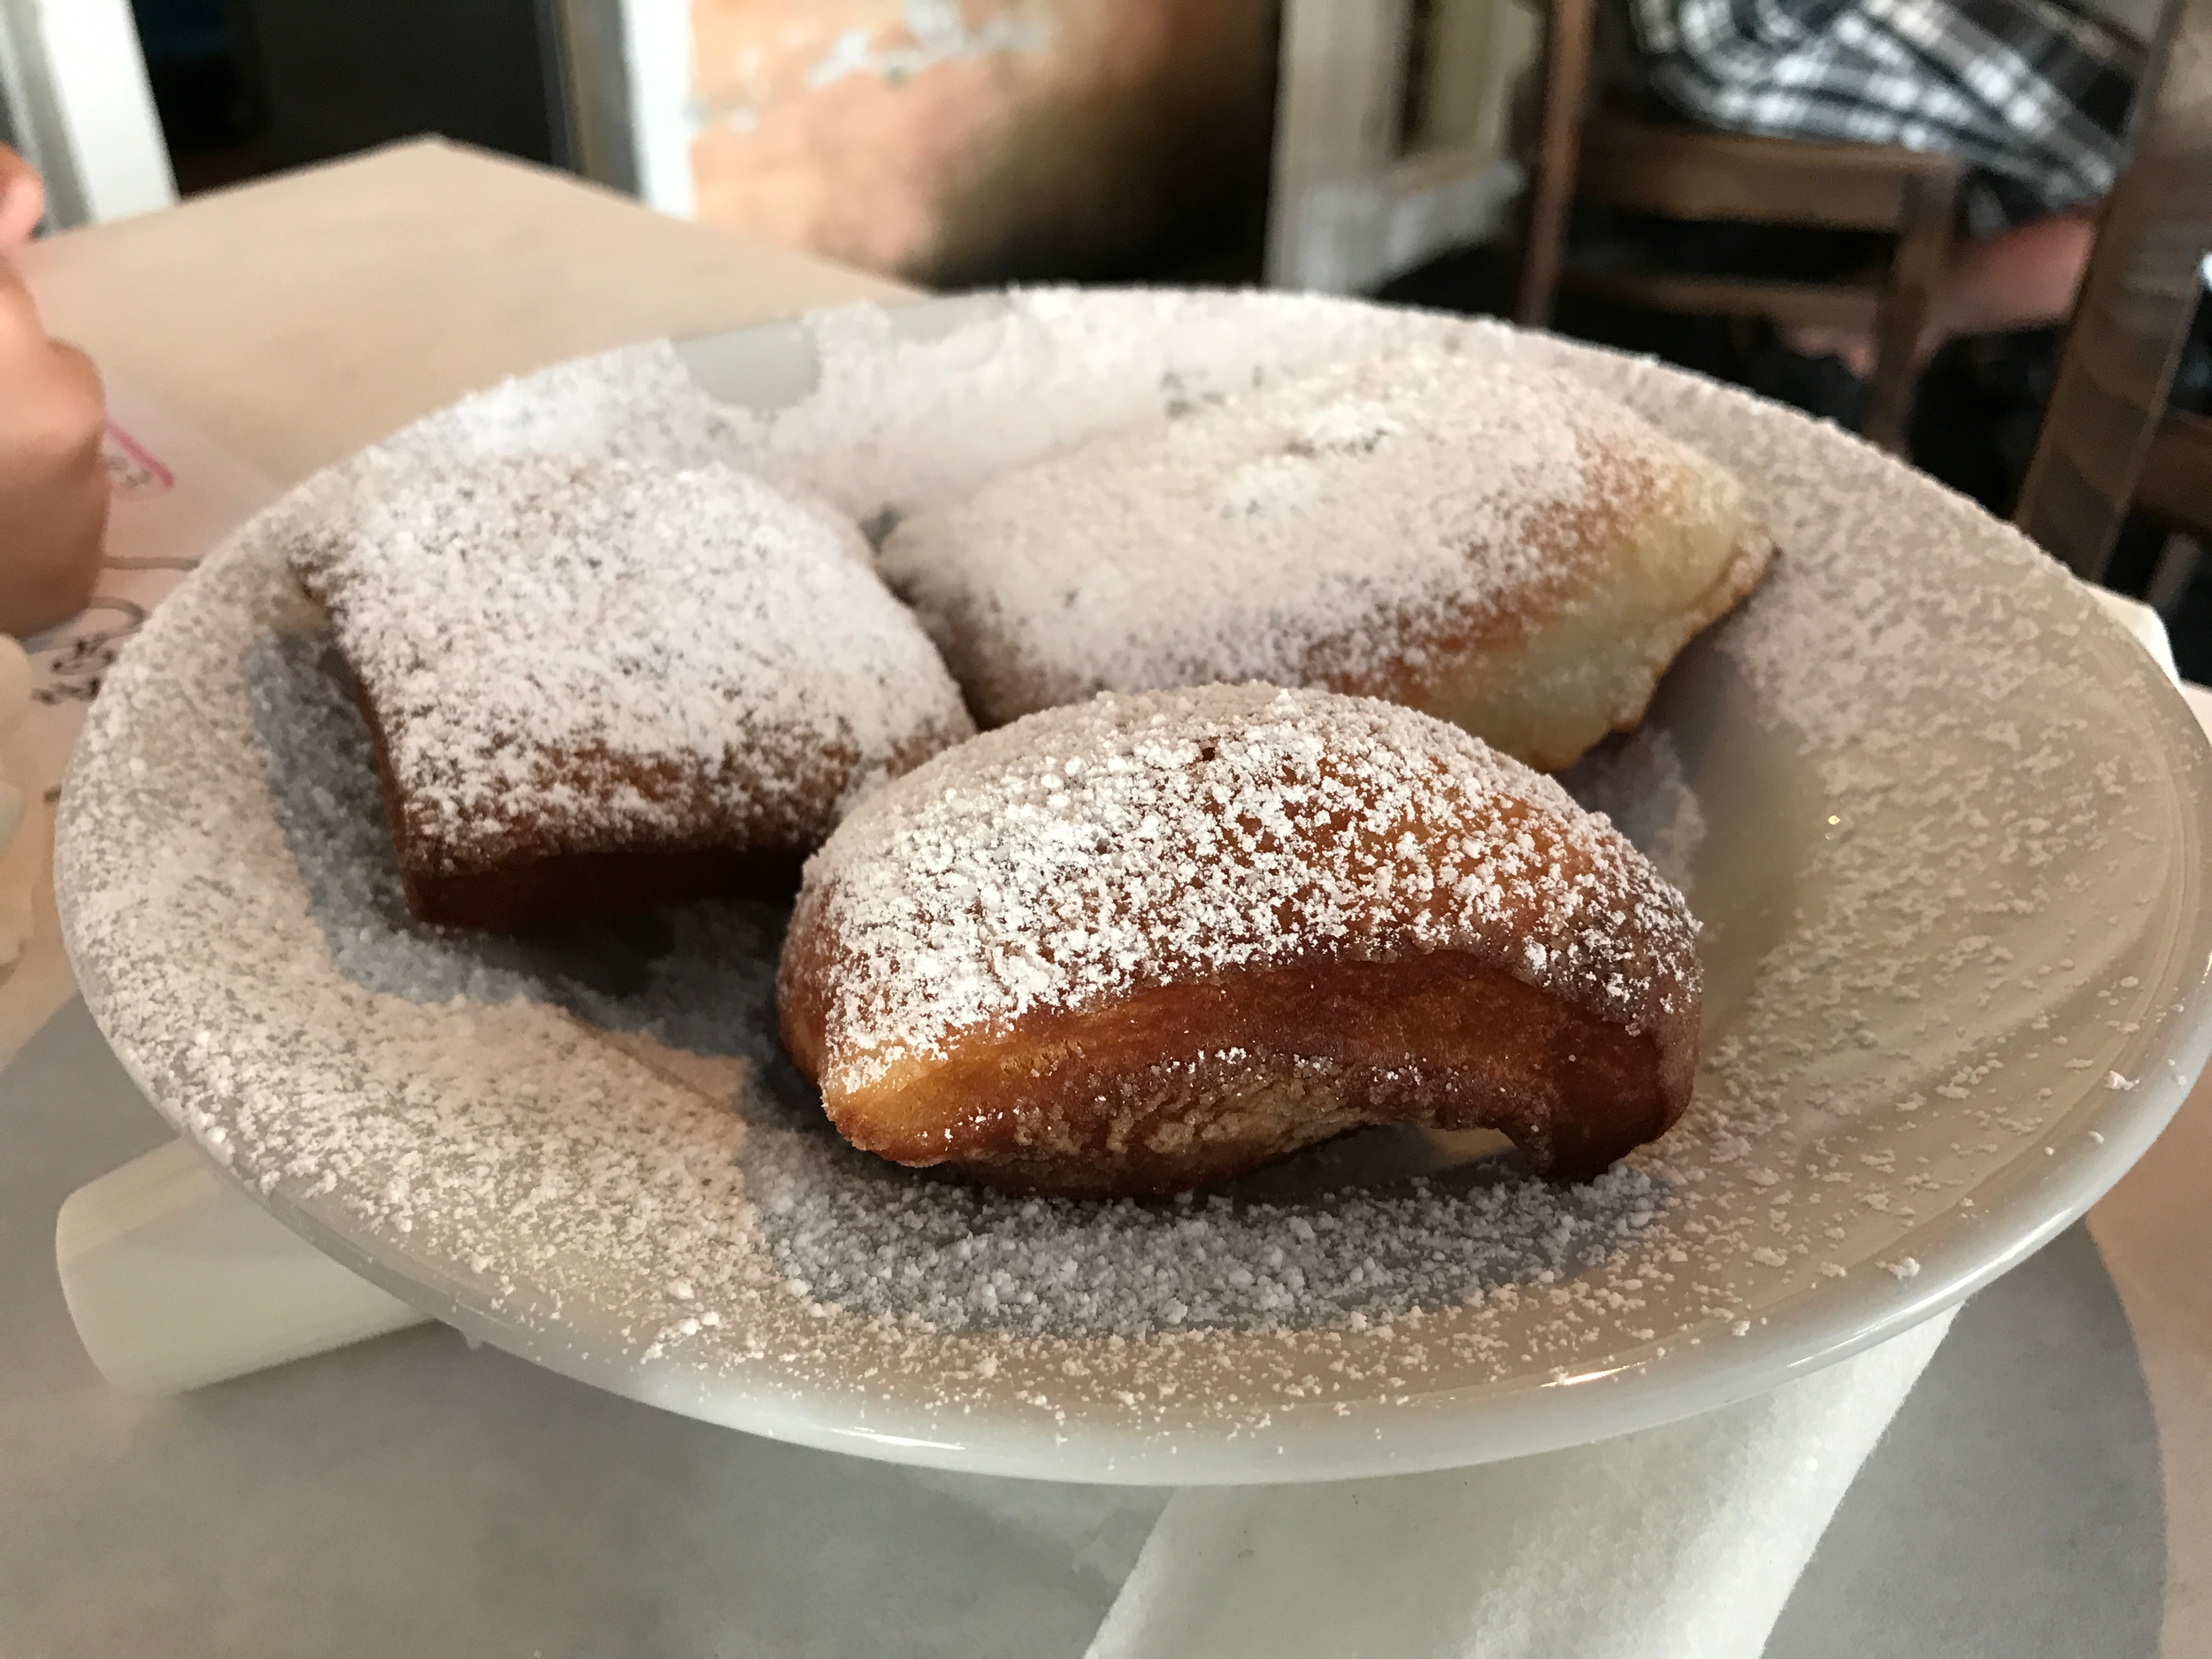 Beignets dusted with powdered sugar